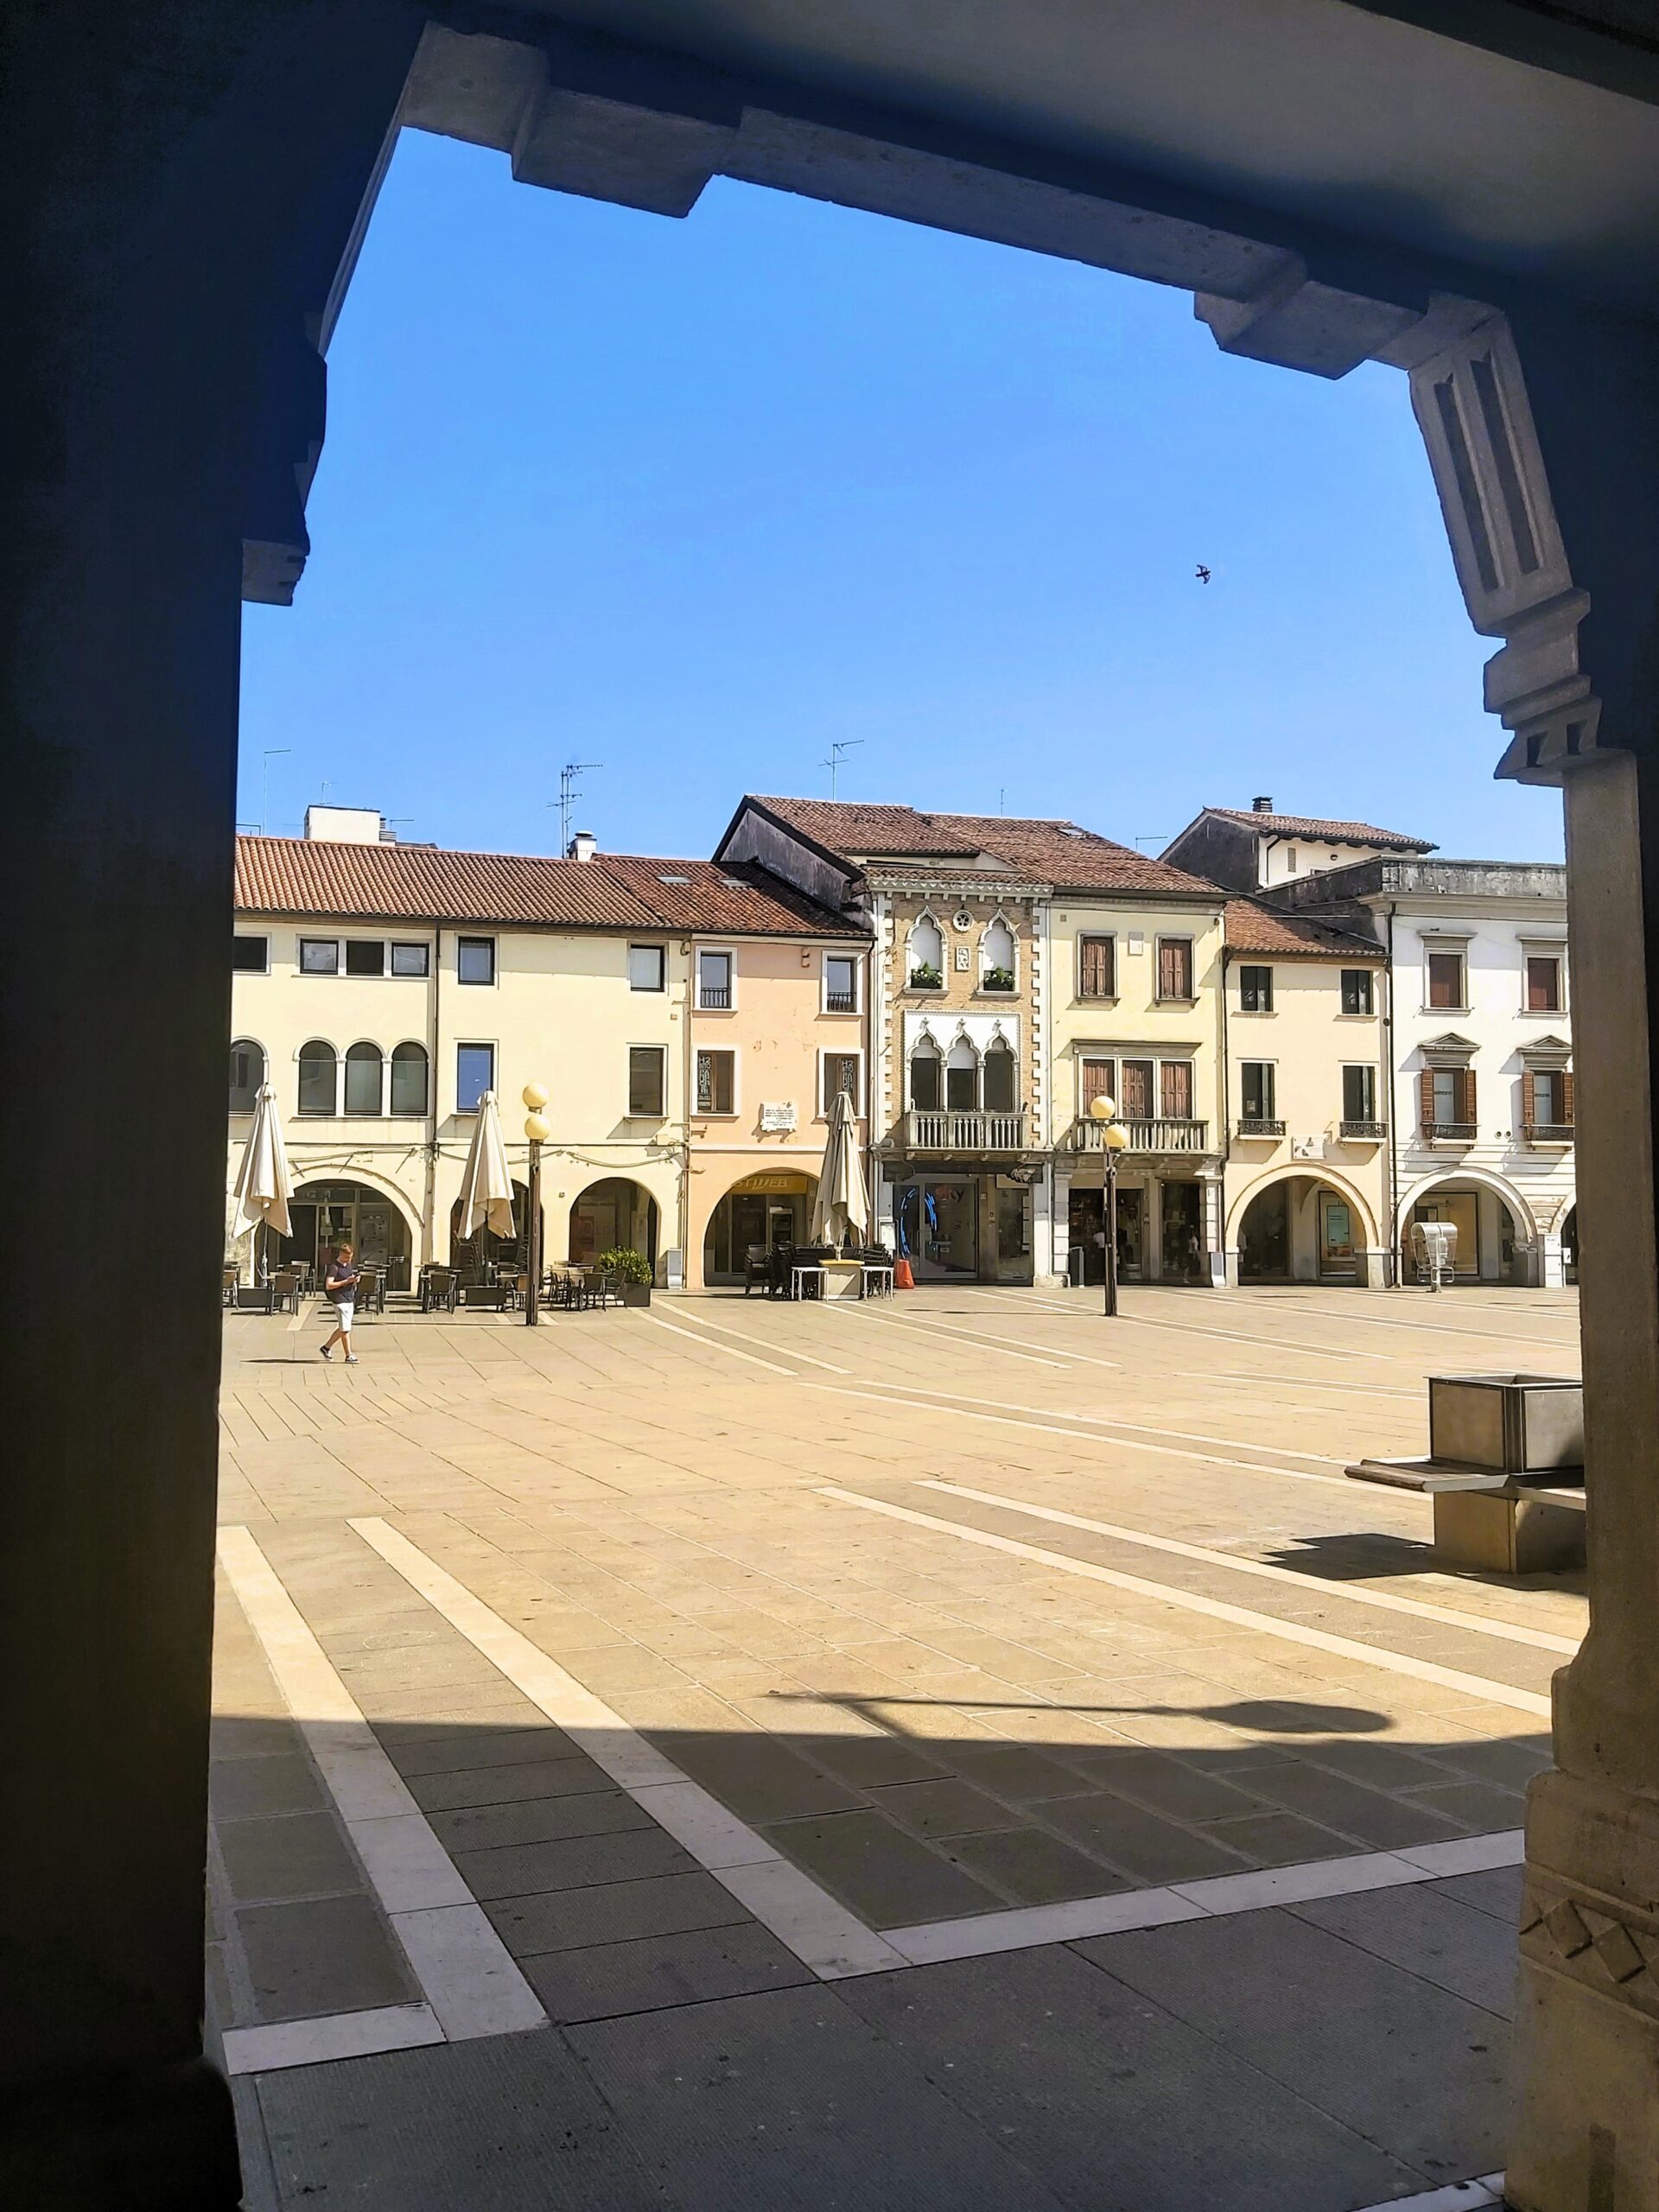 A view of the Piazza Ferretto from the old cinema, Mestre, Italy